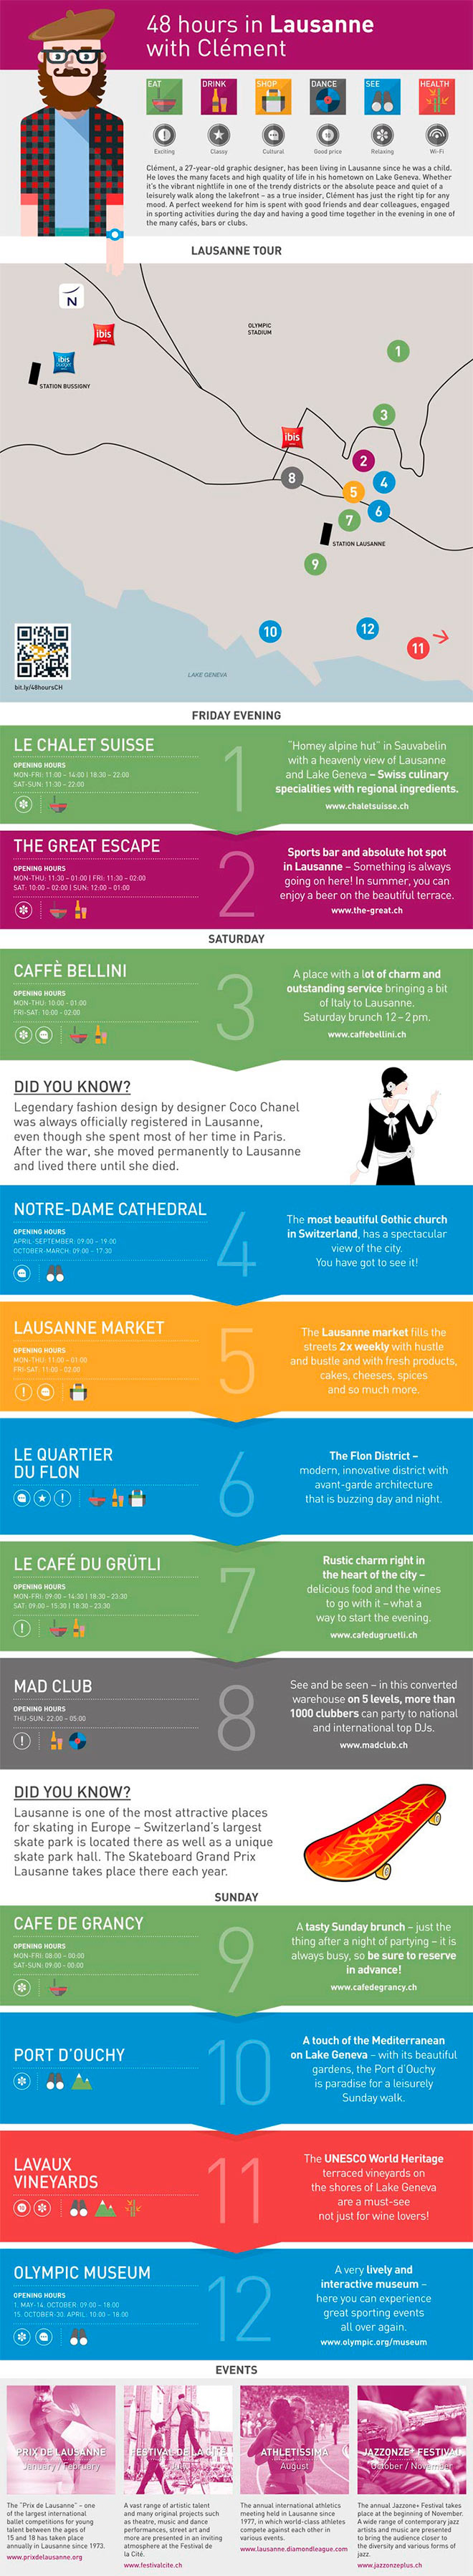 infographic Lausanne